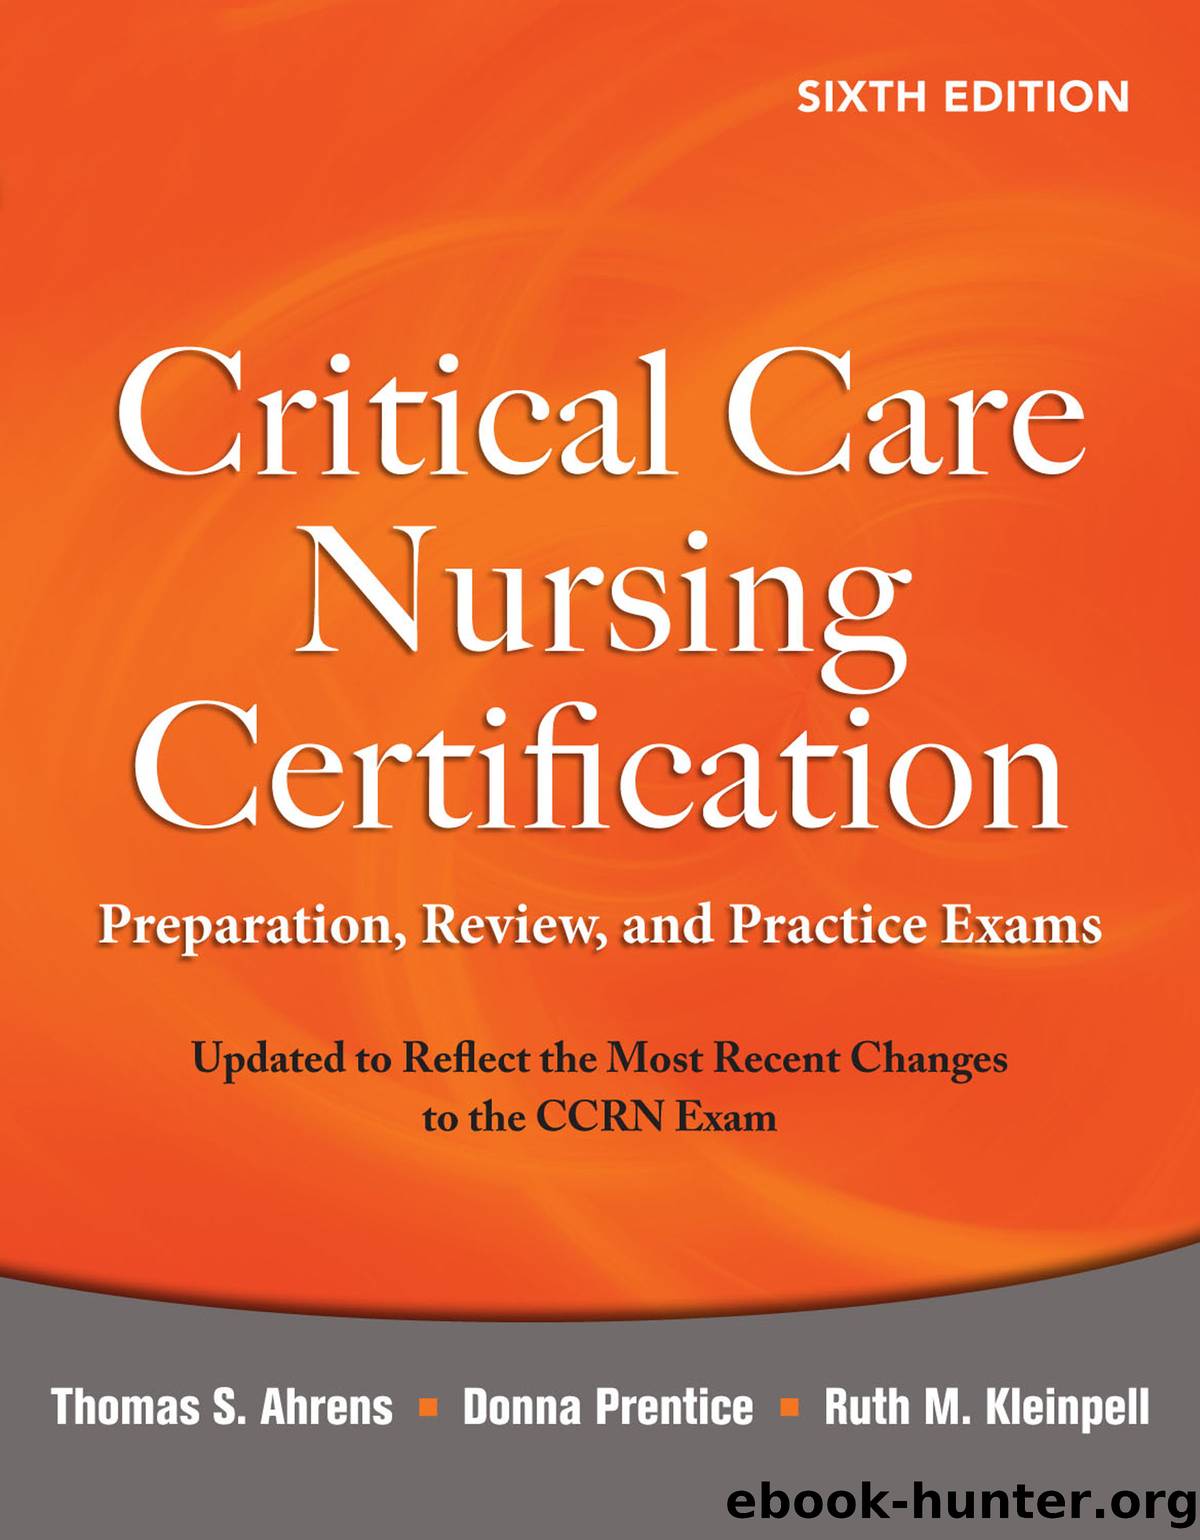 Critical Care Nursing Certification: Preparation, Review, and Practice Exams, Sixth Edition by Thomas Ahrens Donna Prentice Ruth Kleinpell